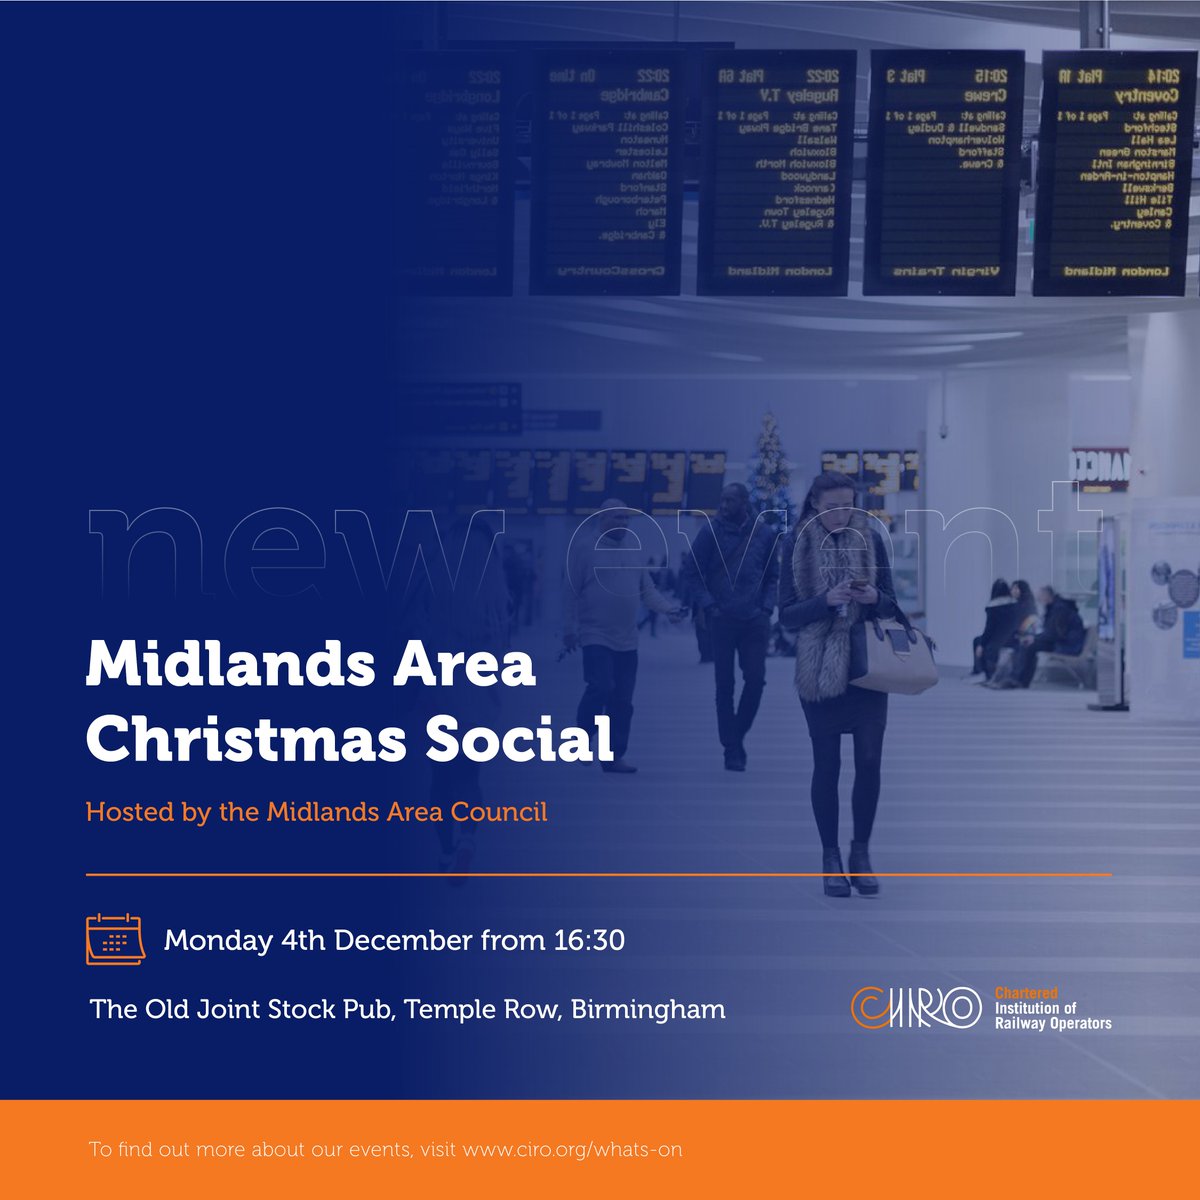 You’re invited to join our Midlands Area Council for their Christmas Social Event on the 4th December! Meet your Midlands Area Council and network with fellow CIRO members before a festive buffet. Register today: ow.ly/ESGW50Q9pm4 #RailEvent #CIROEvent #MidlandsRail